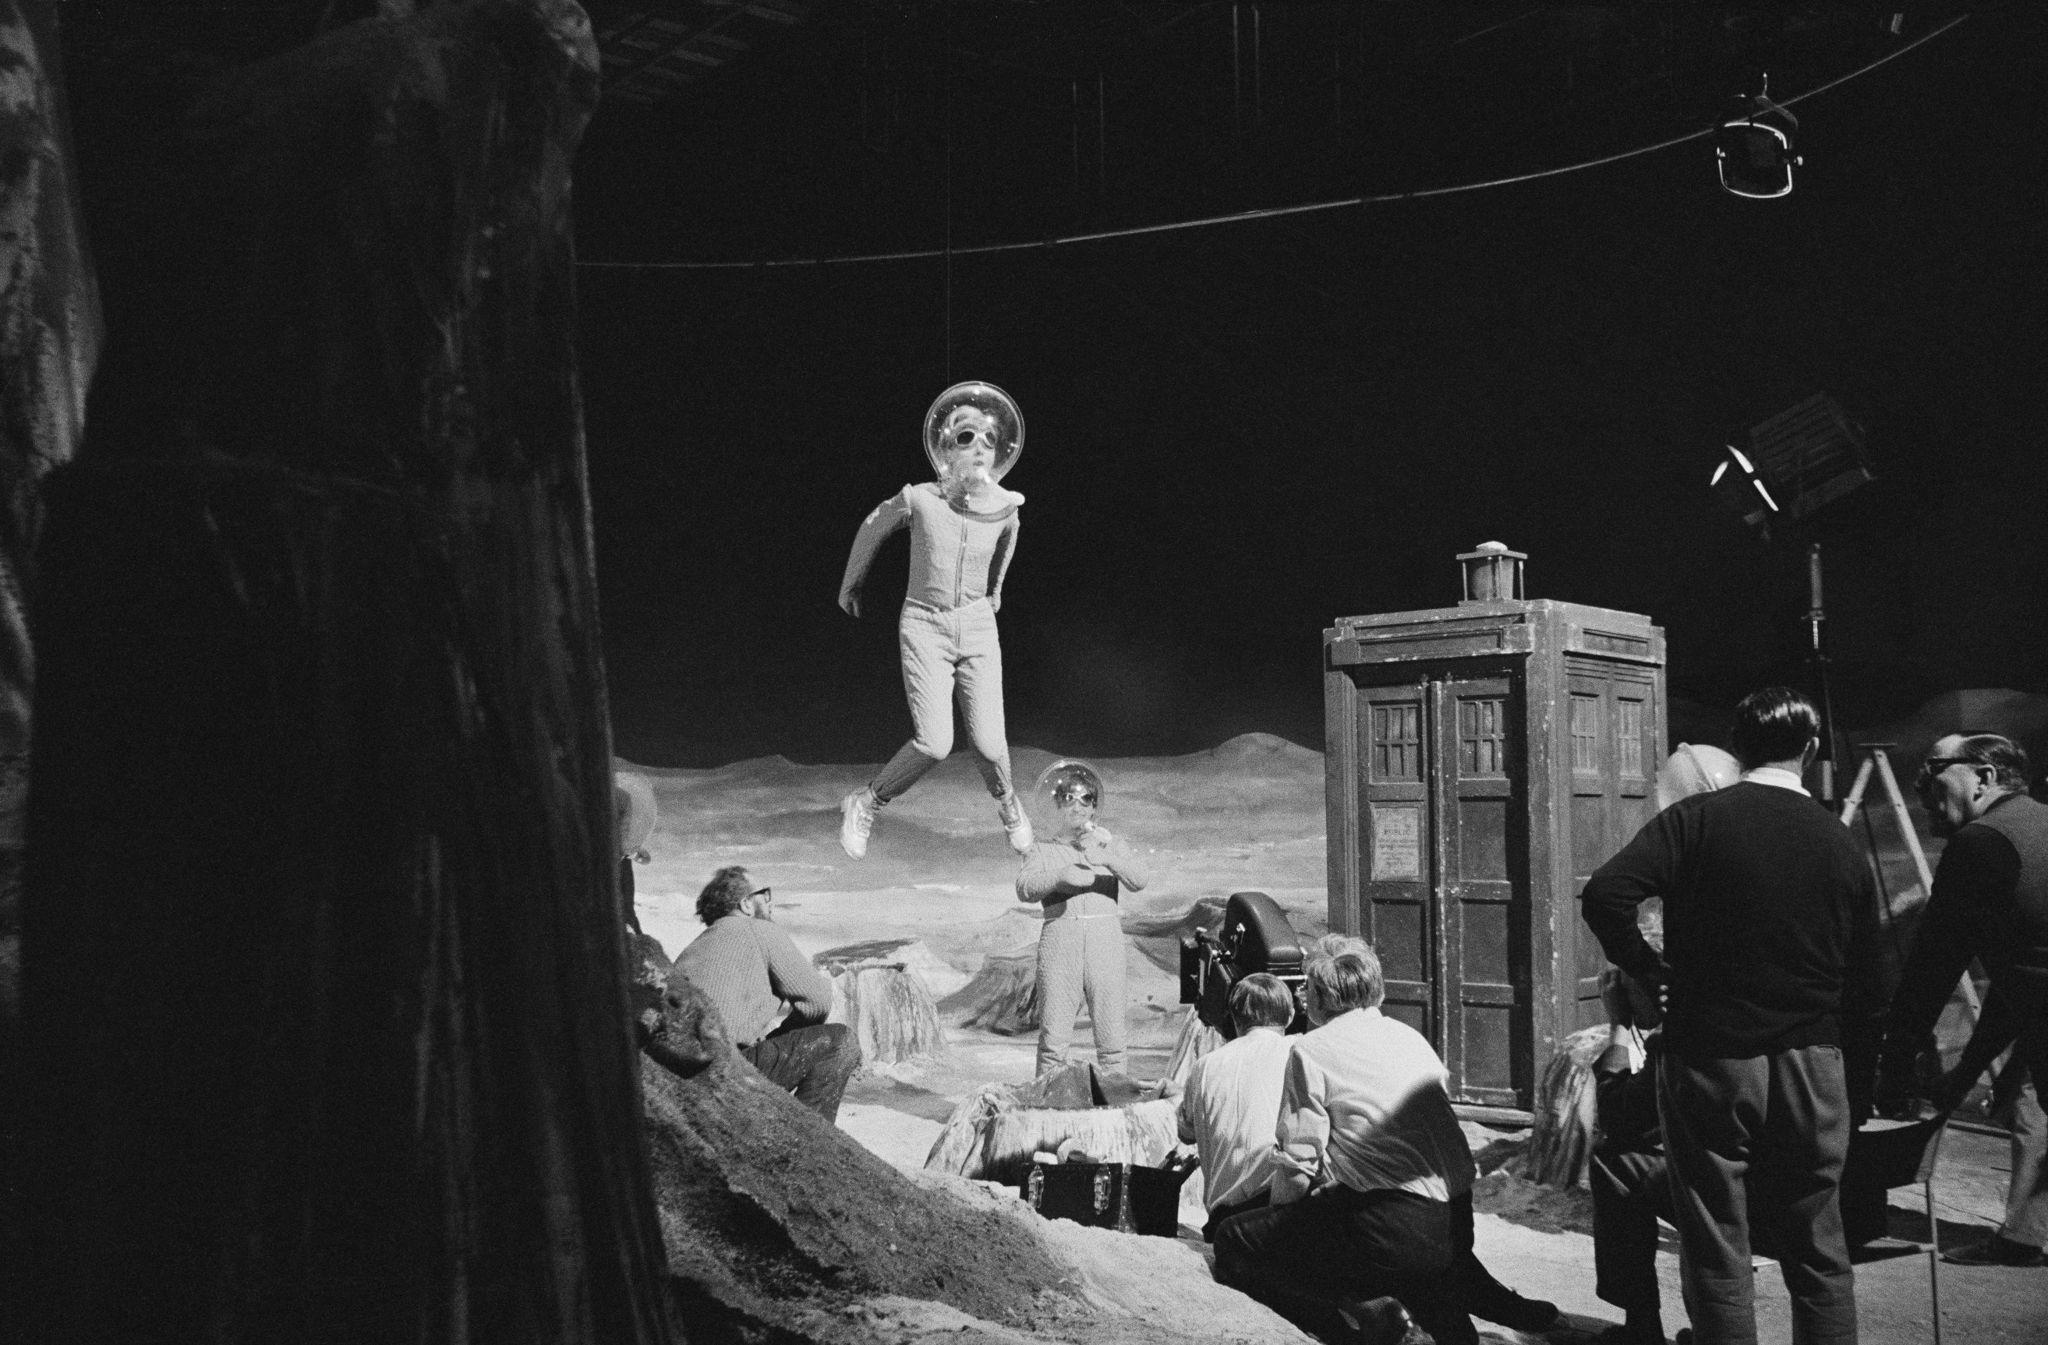 Cast and crew on set for the shooting of the Doctor Who story The Moonbase